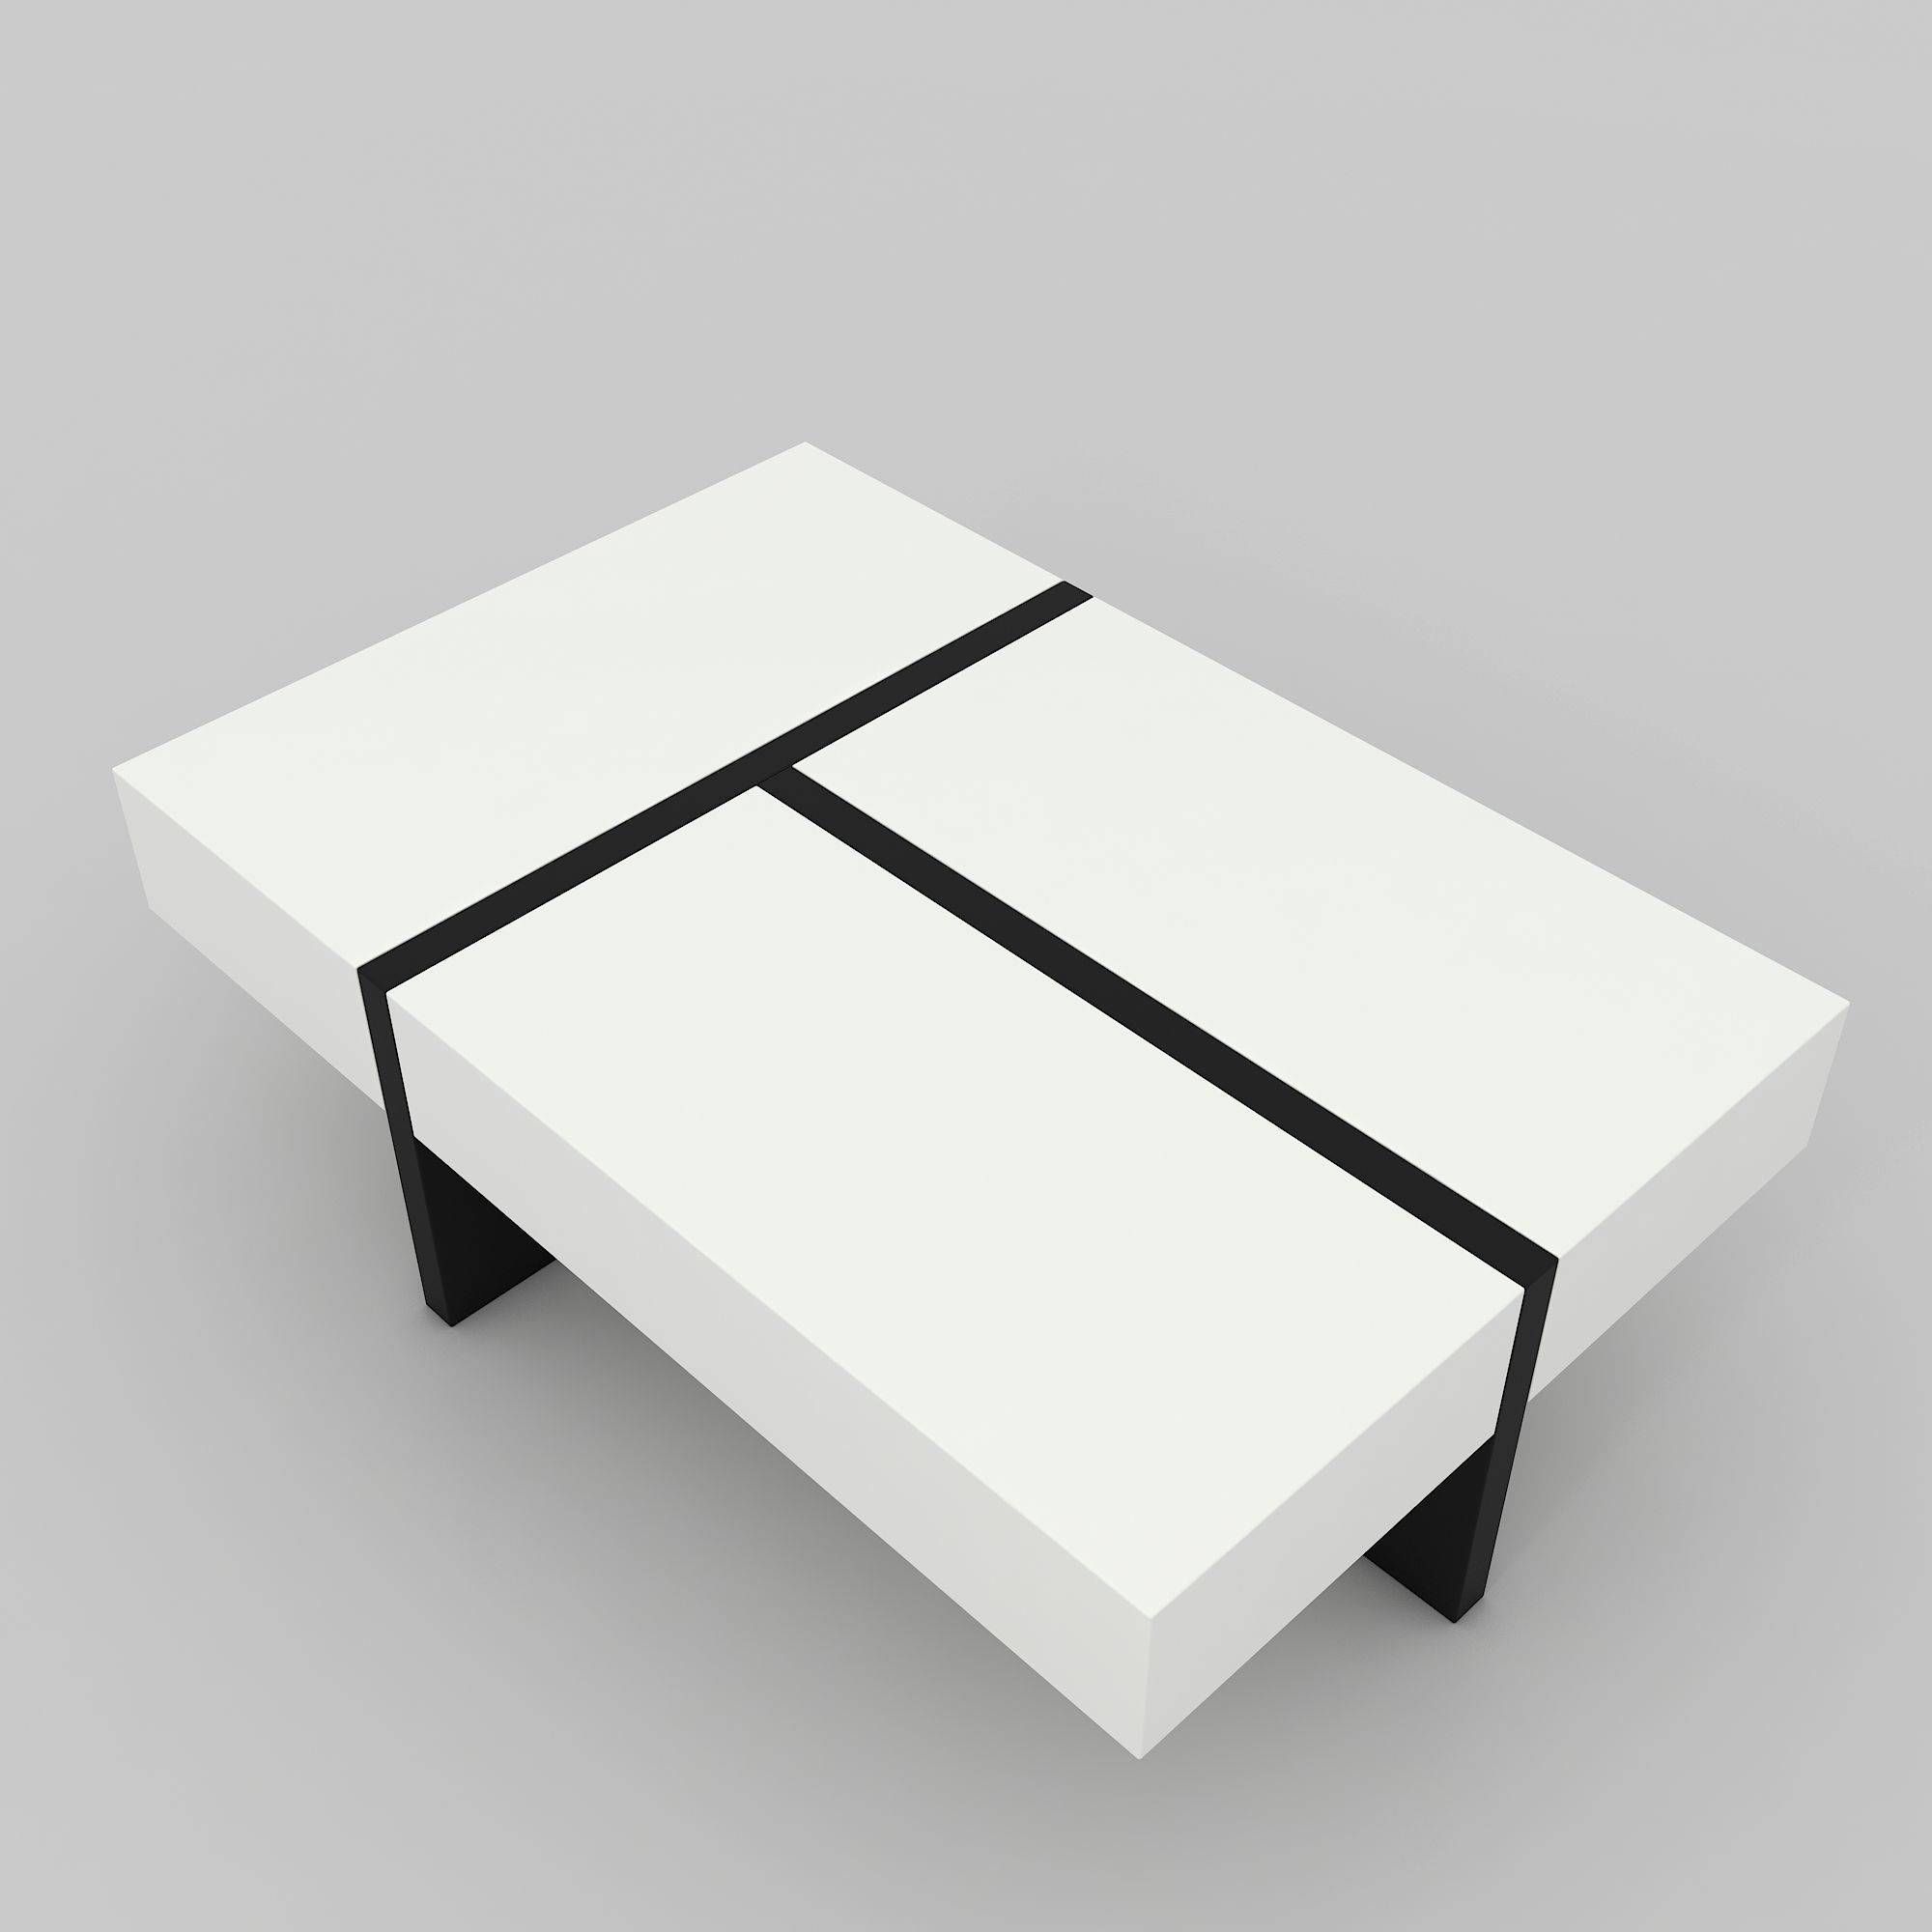 Mcintosh High Gloss Coffee Table 3d Model Max Obj 3ds Fbx Dae Mtl Regarding High Gloss Coffee Tables (View 9 of 30)